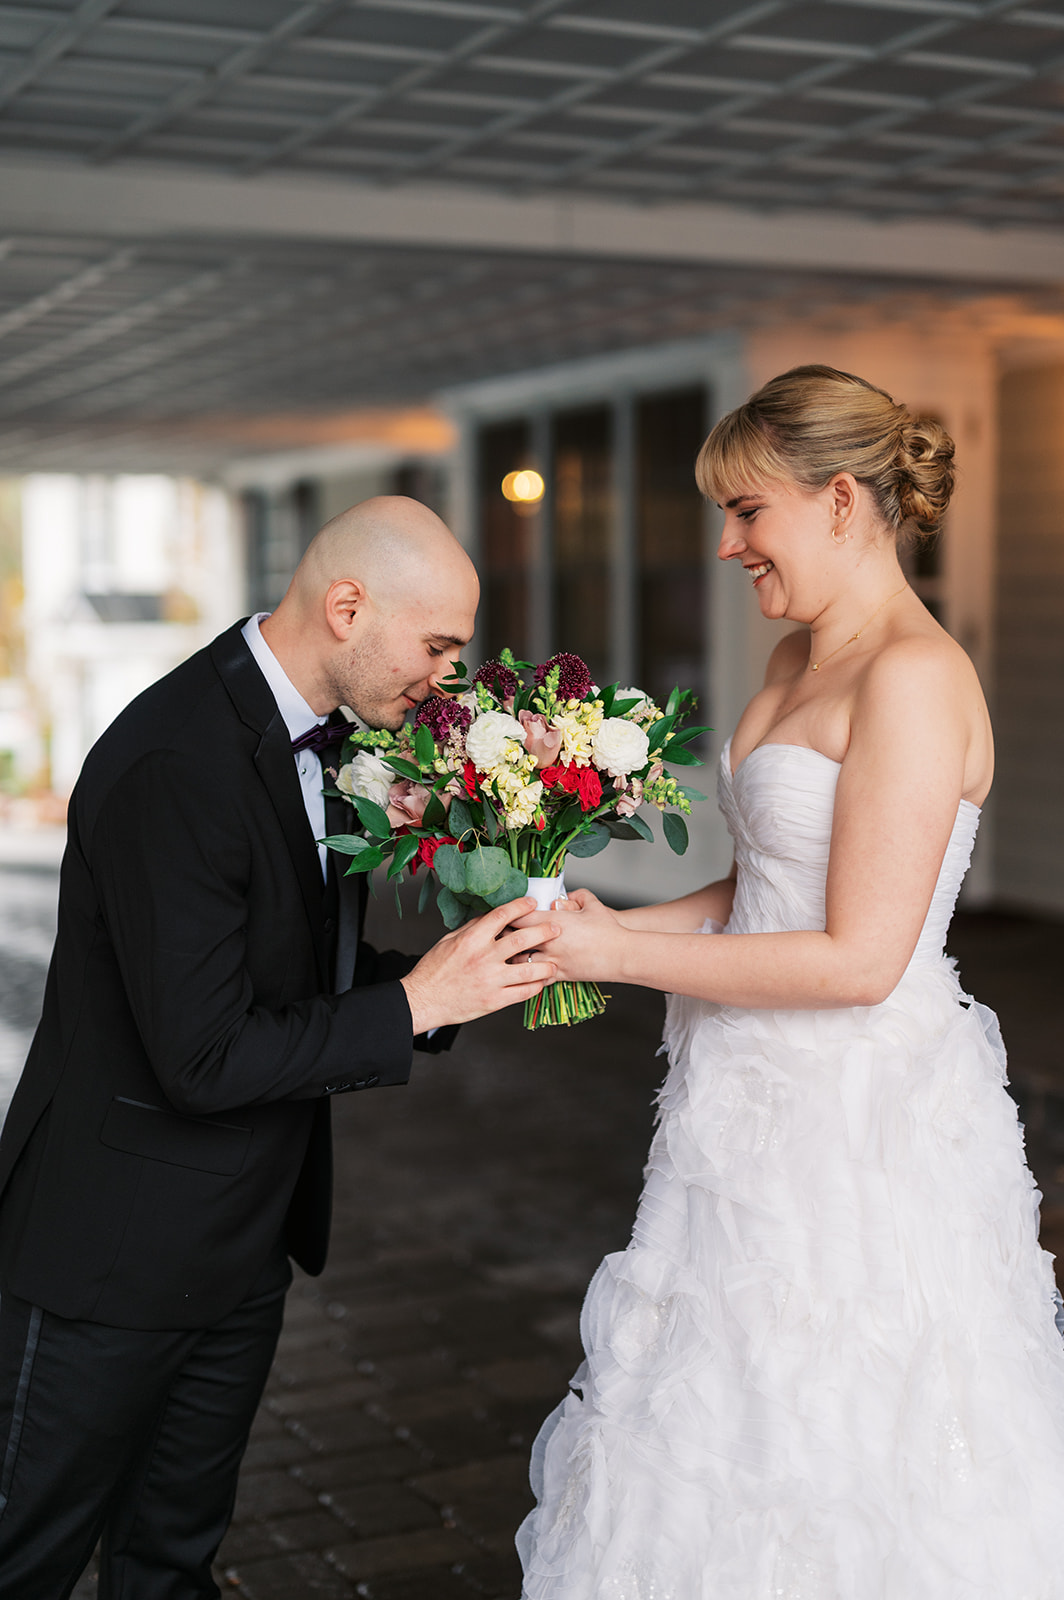 A groom smells his bride's flowers